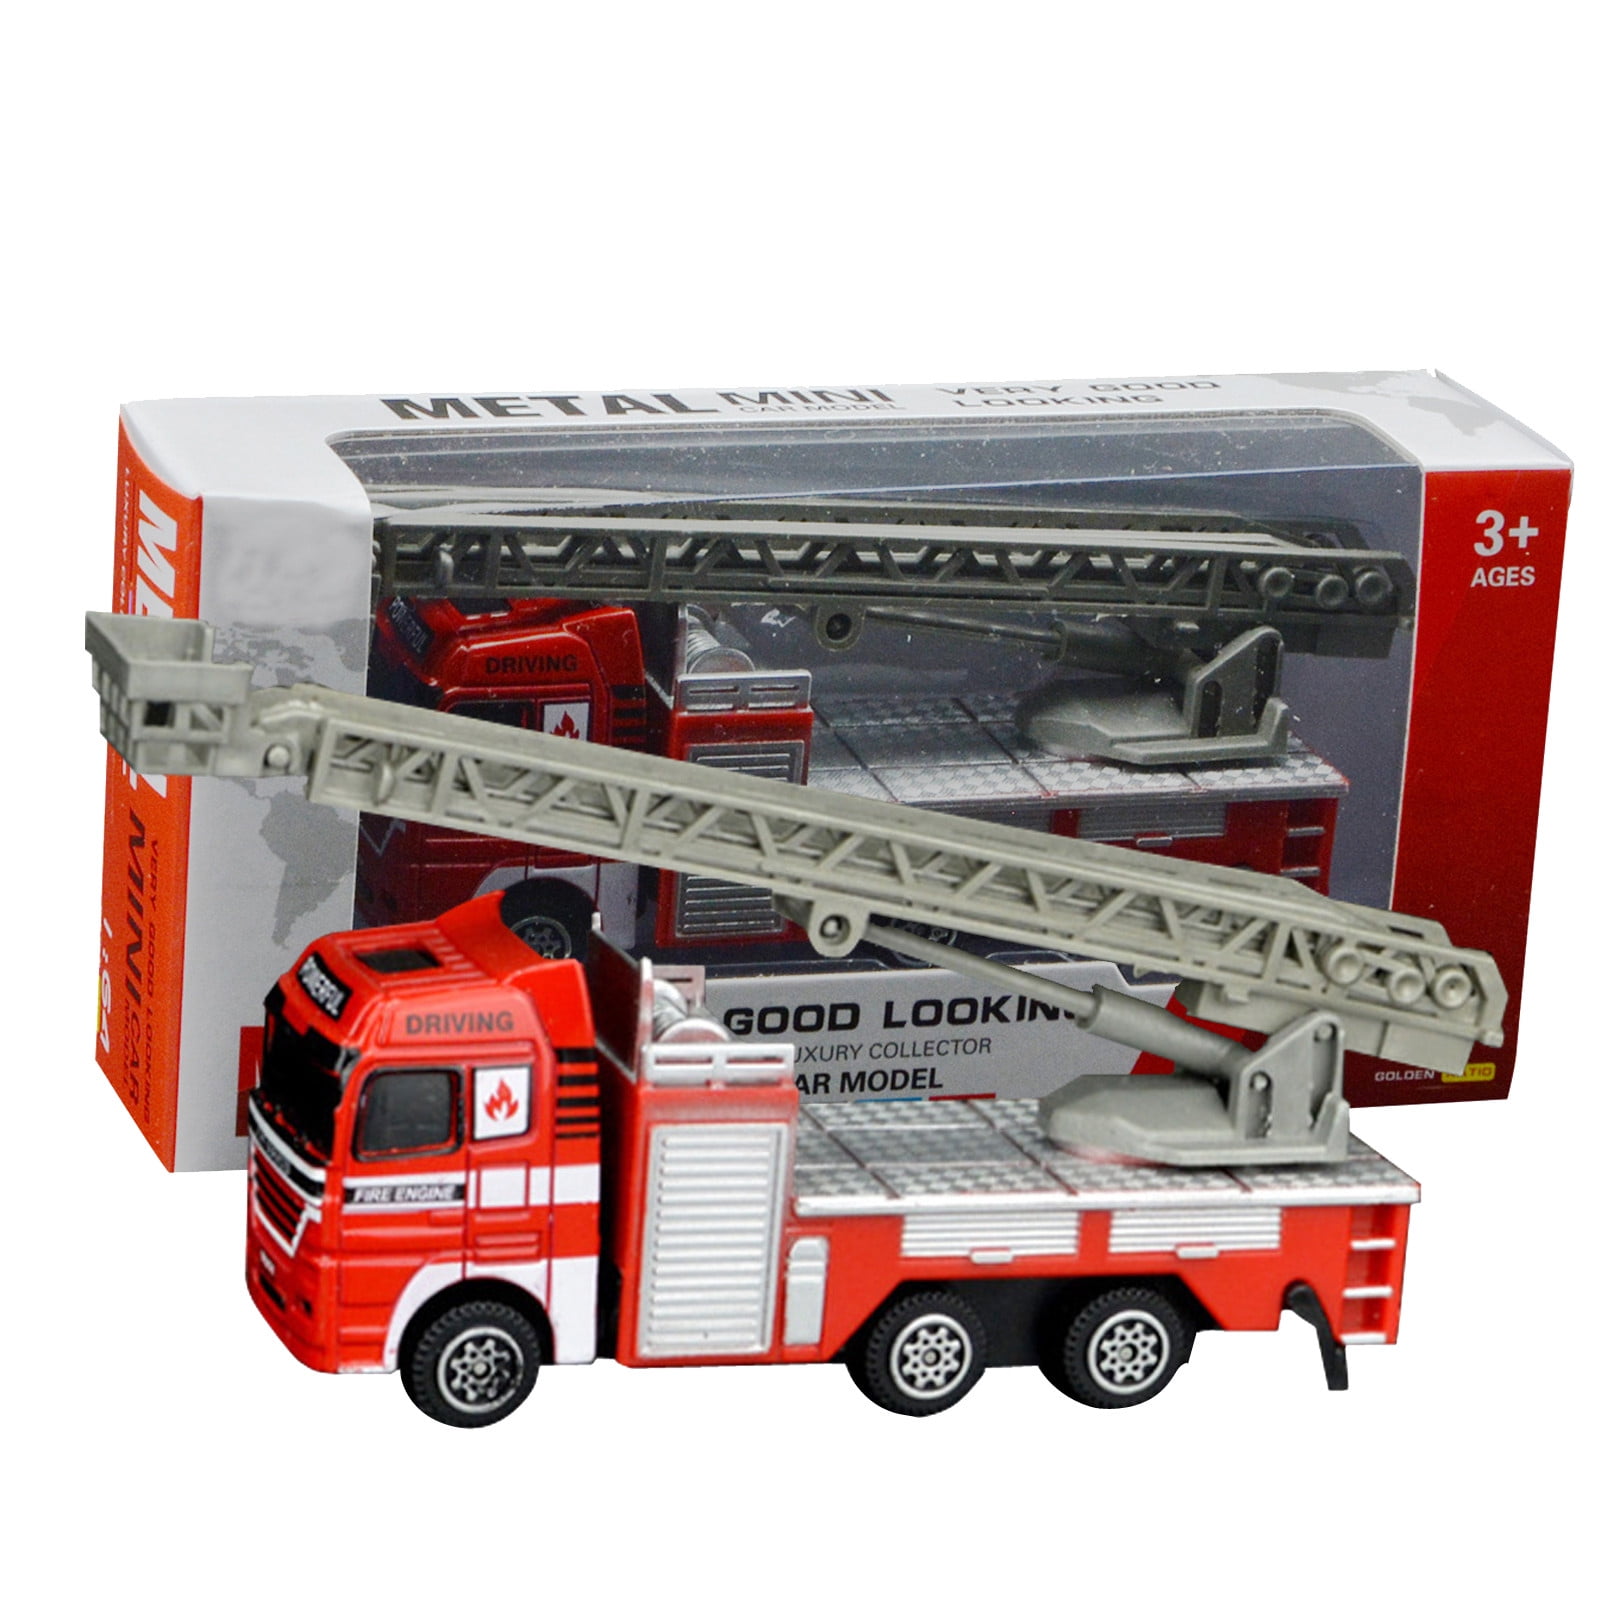 Fire Truck Toy Toys Model Kids Car Rescue Vehicle Gift Educational Boys Gift 